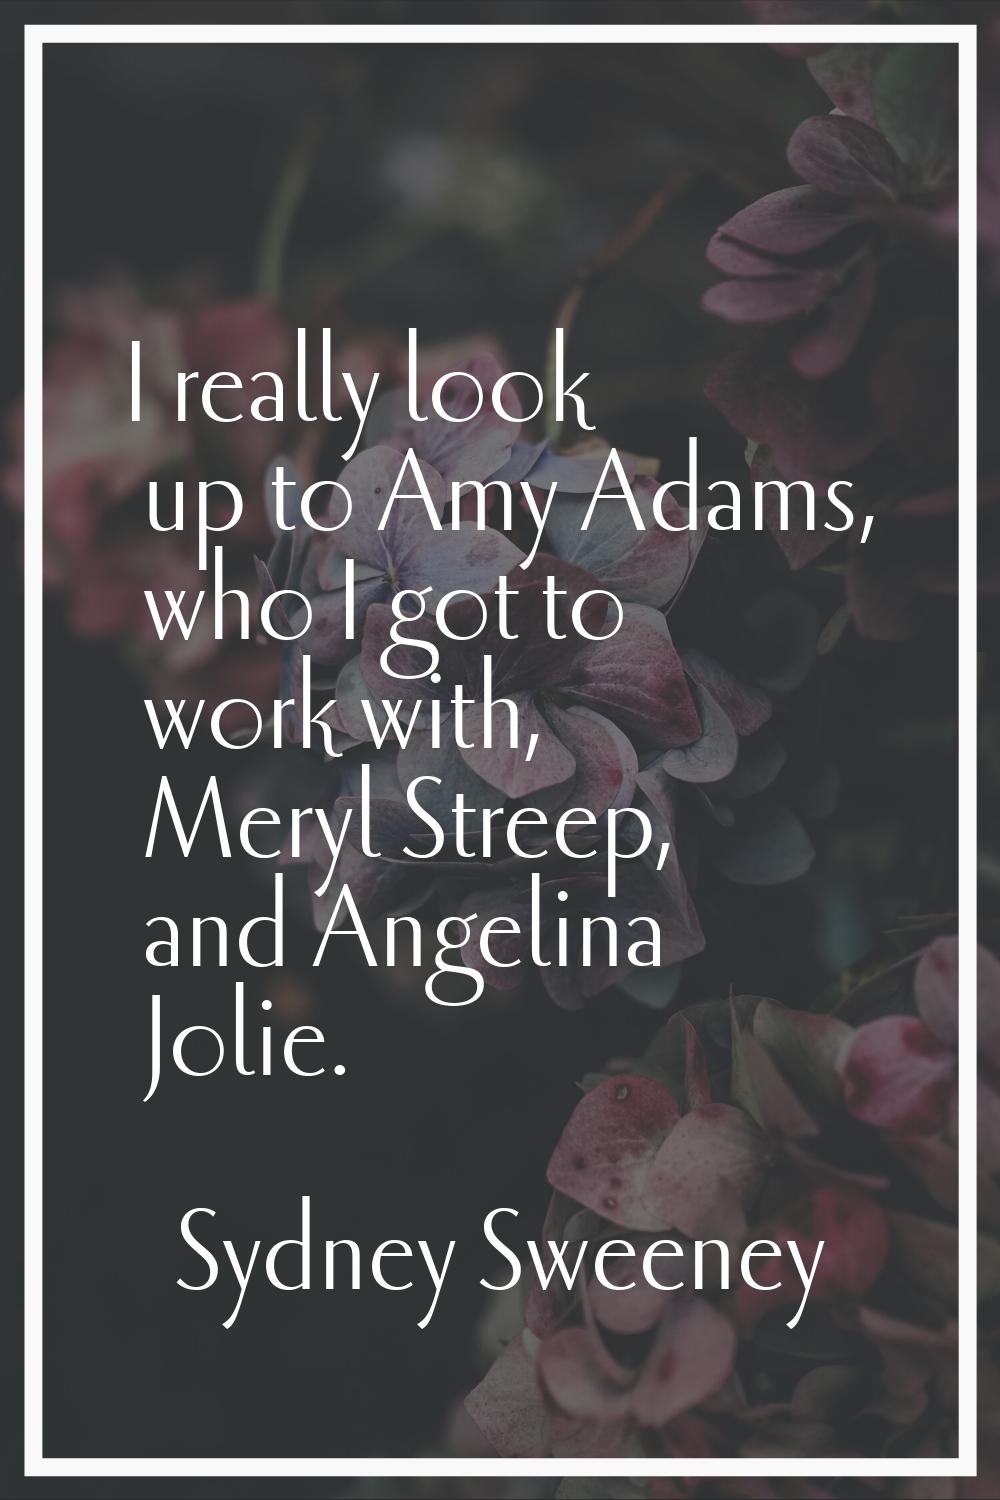 I really look up to Amy Adams, who I got to work with, Meryl Streep, and Angelina Jolie.